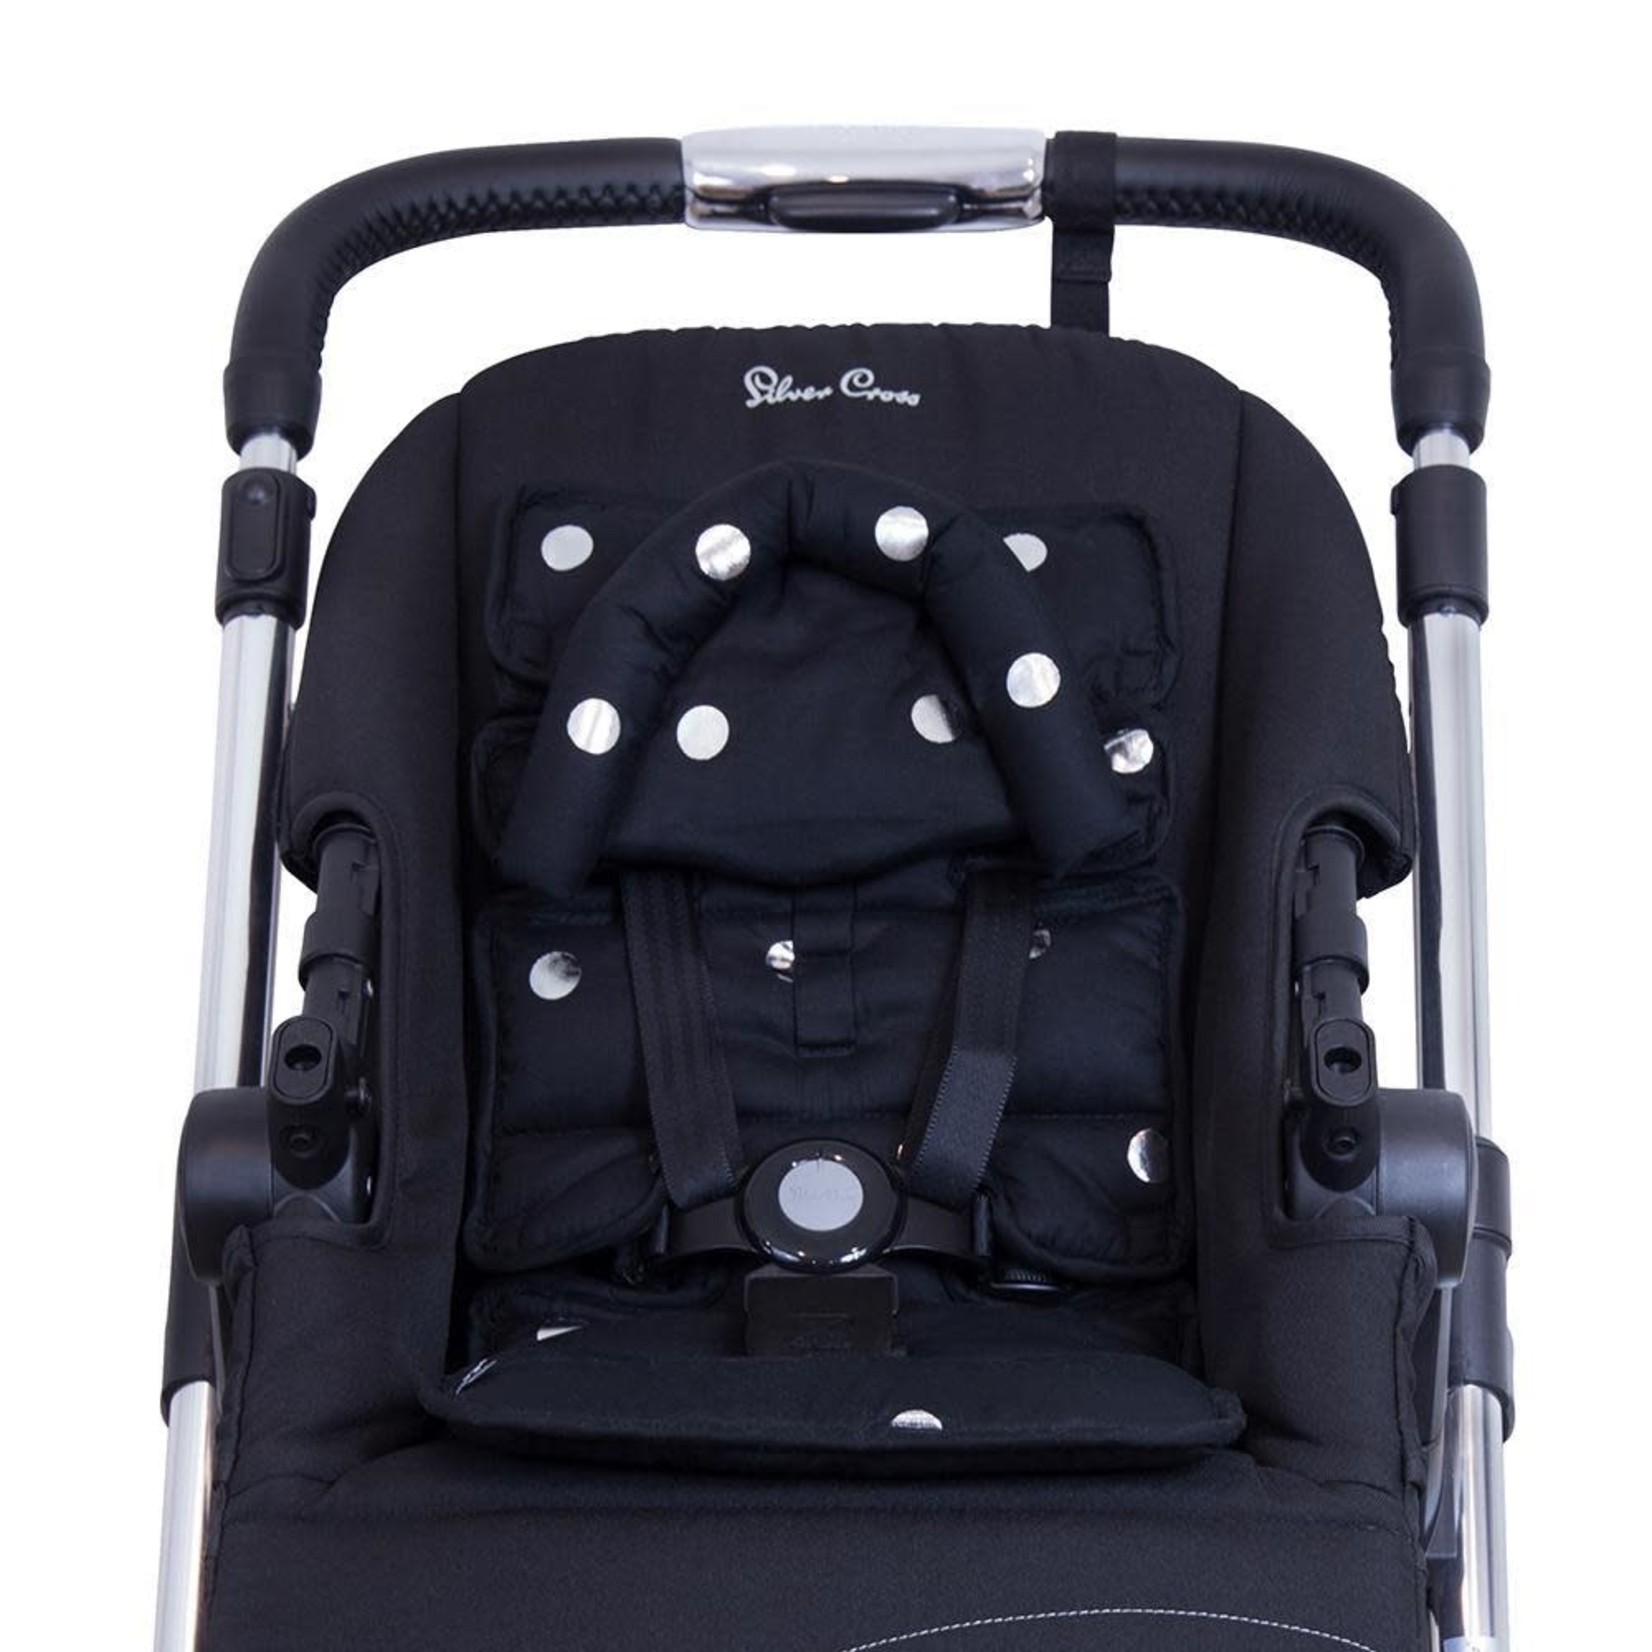 Outlookbaby Mini Pram Liner with adjustable head support - Black/Silver Spots